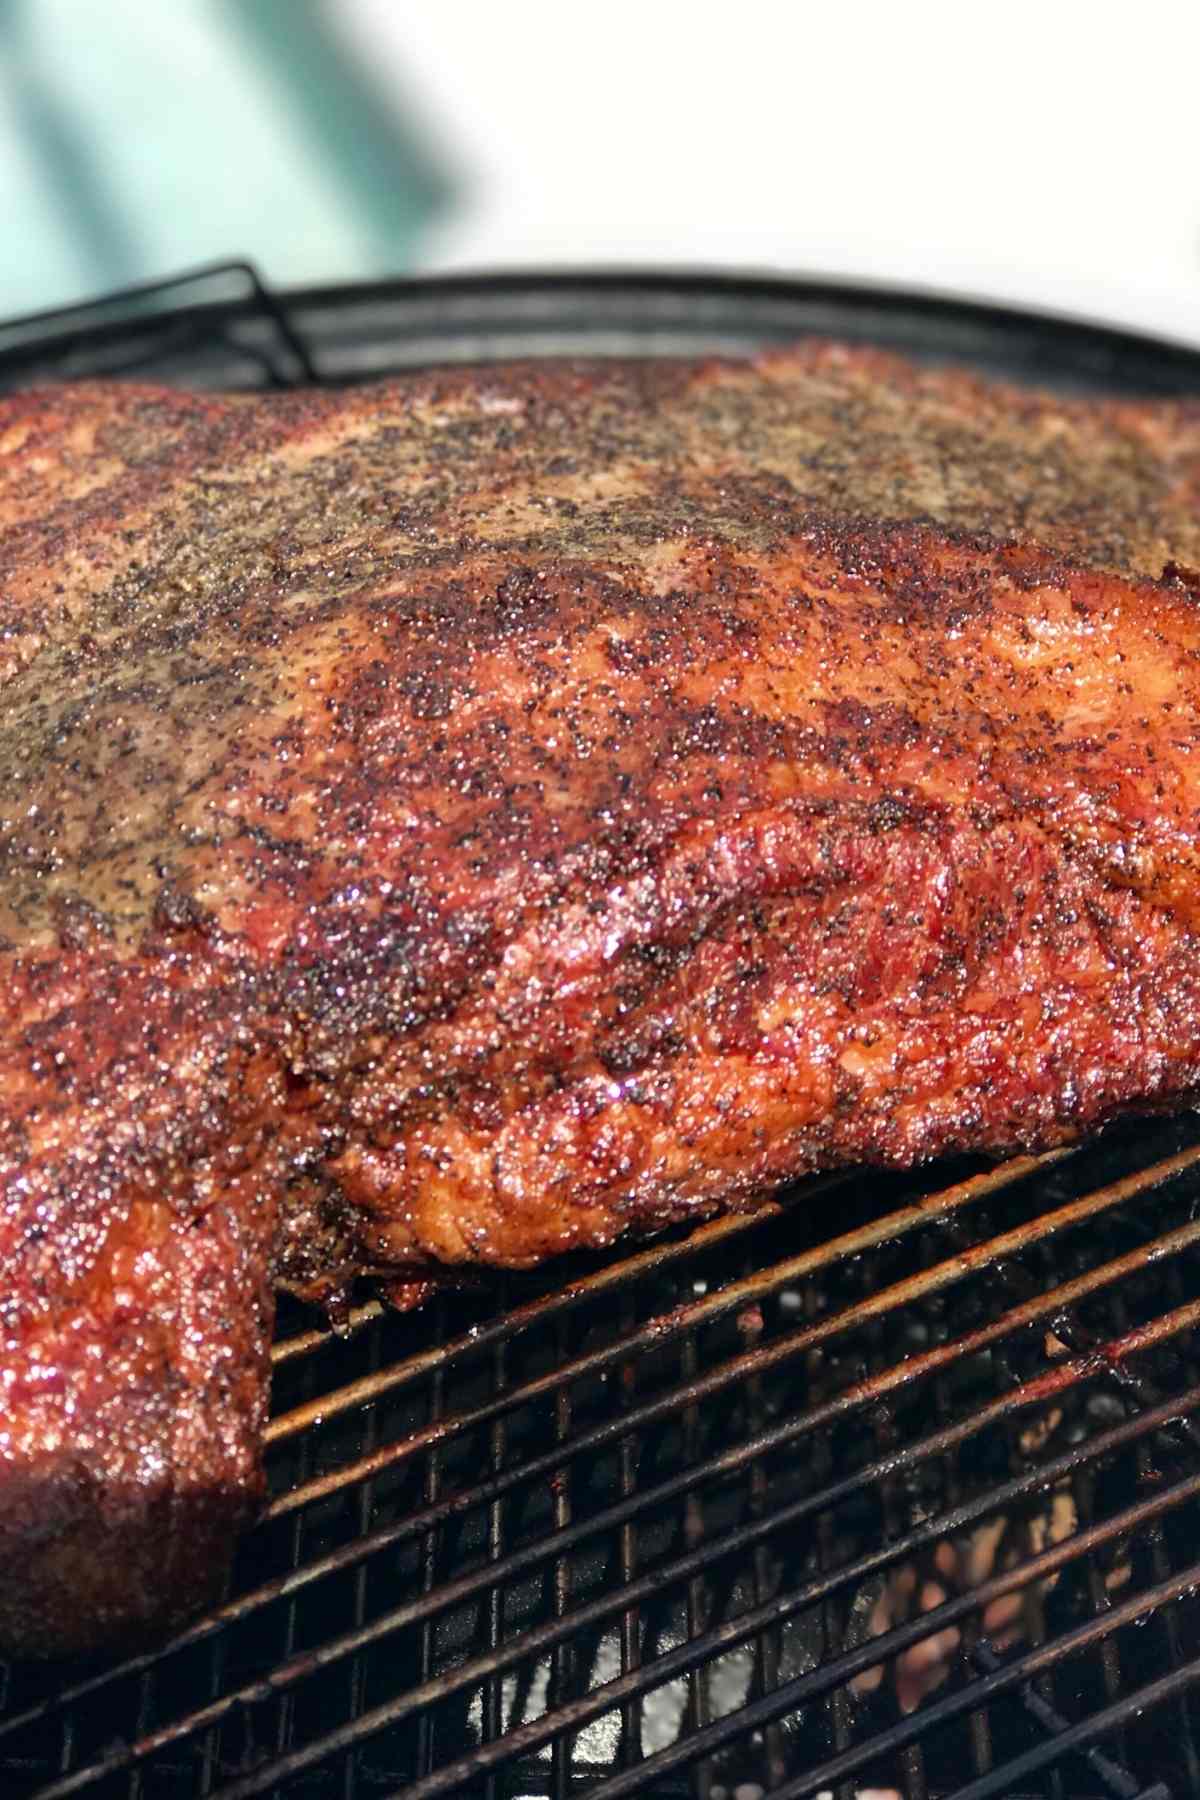 Learn how to reheat brisket so that it’s as tender and juicy as the day it was cooked! Once a brisket is cooked to perfection, reheating the leftovers is a breeze. It just takes the right technique and a bit of patience.